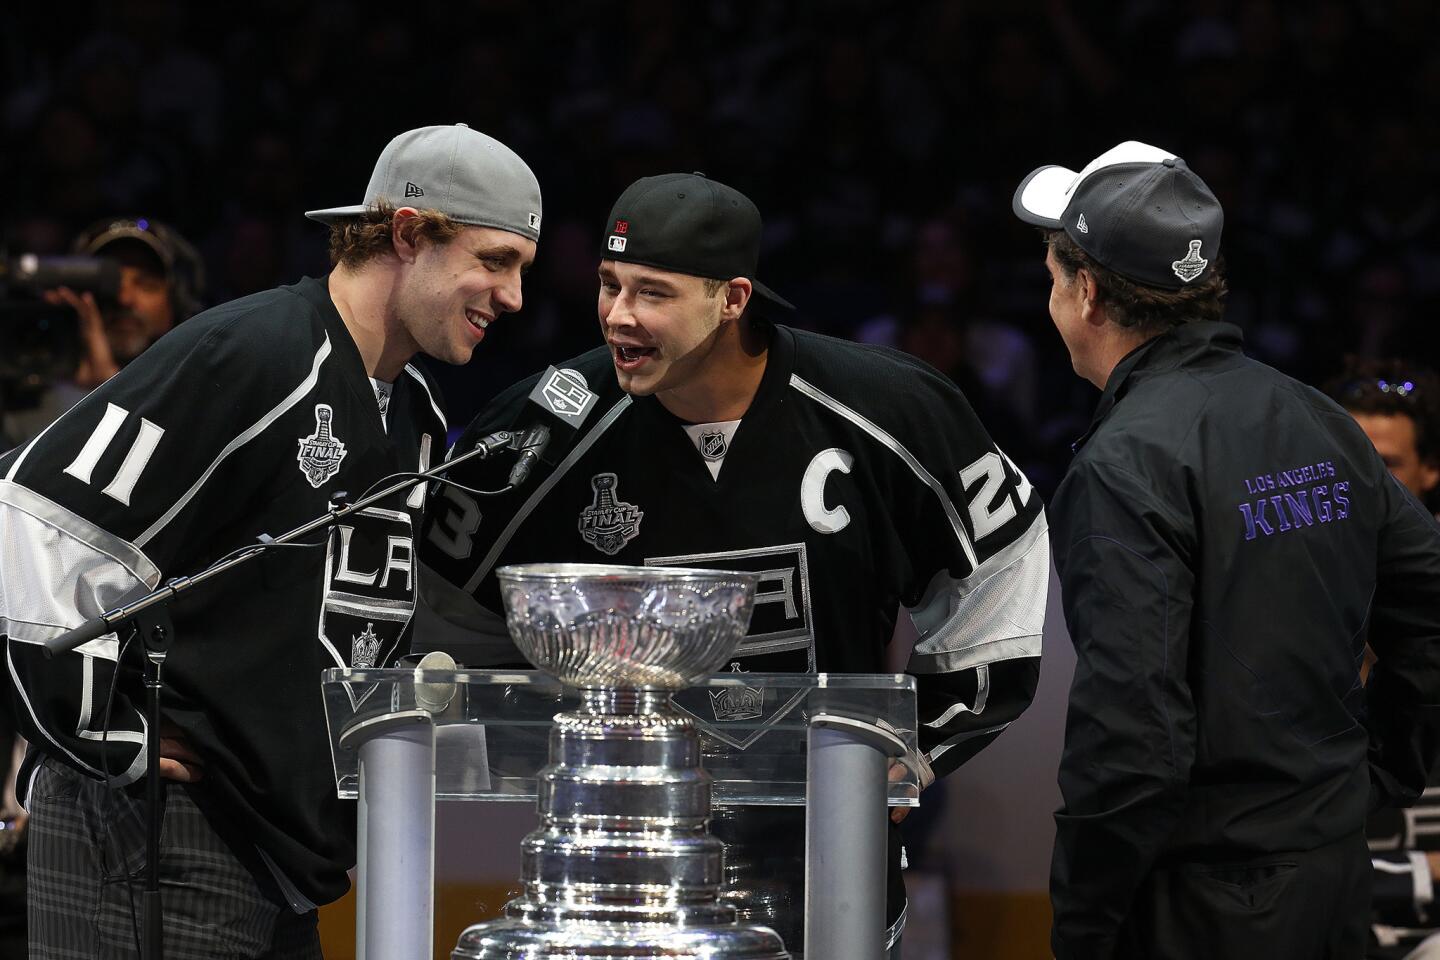  NHL Los Angeles Kings 2014 Stanley Cup Championship